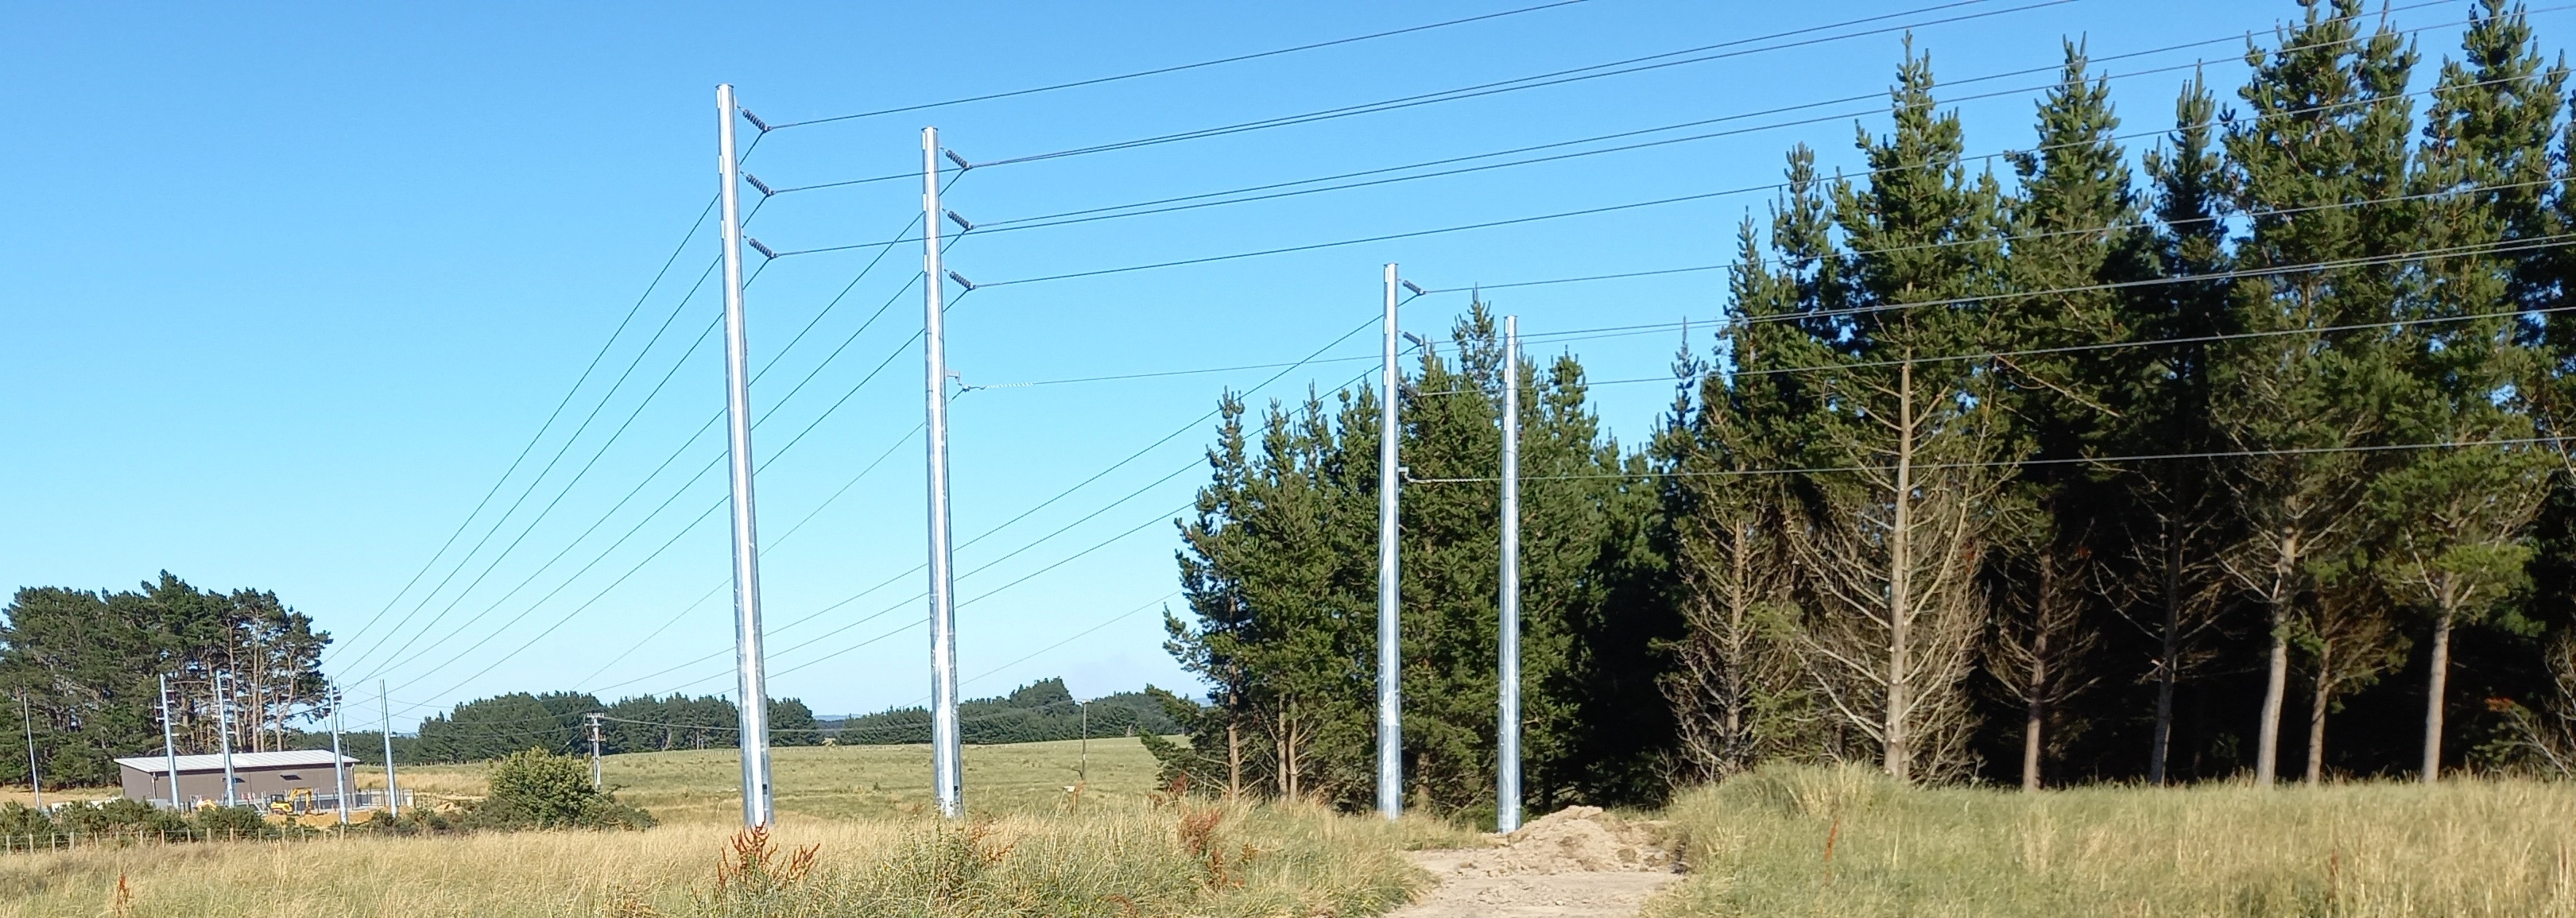 Monopoles and wires coming from the new Linton Substation building